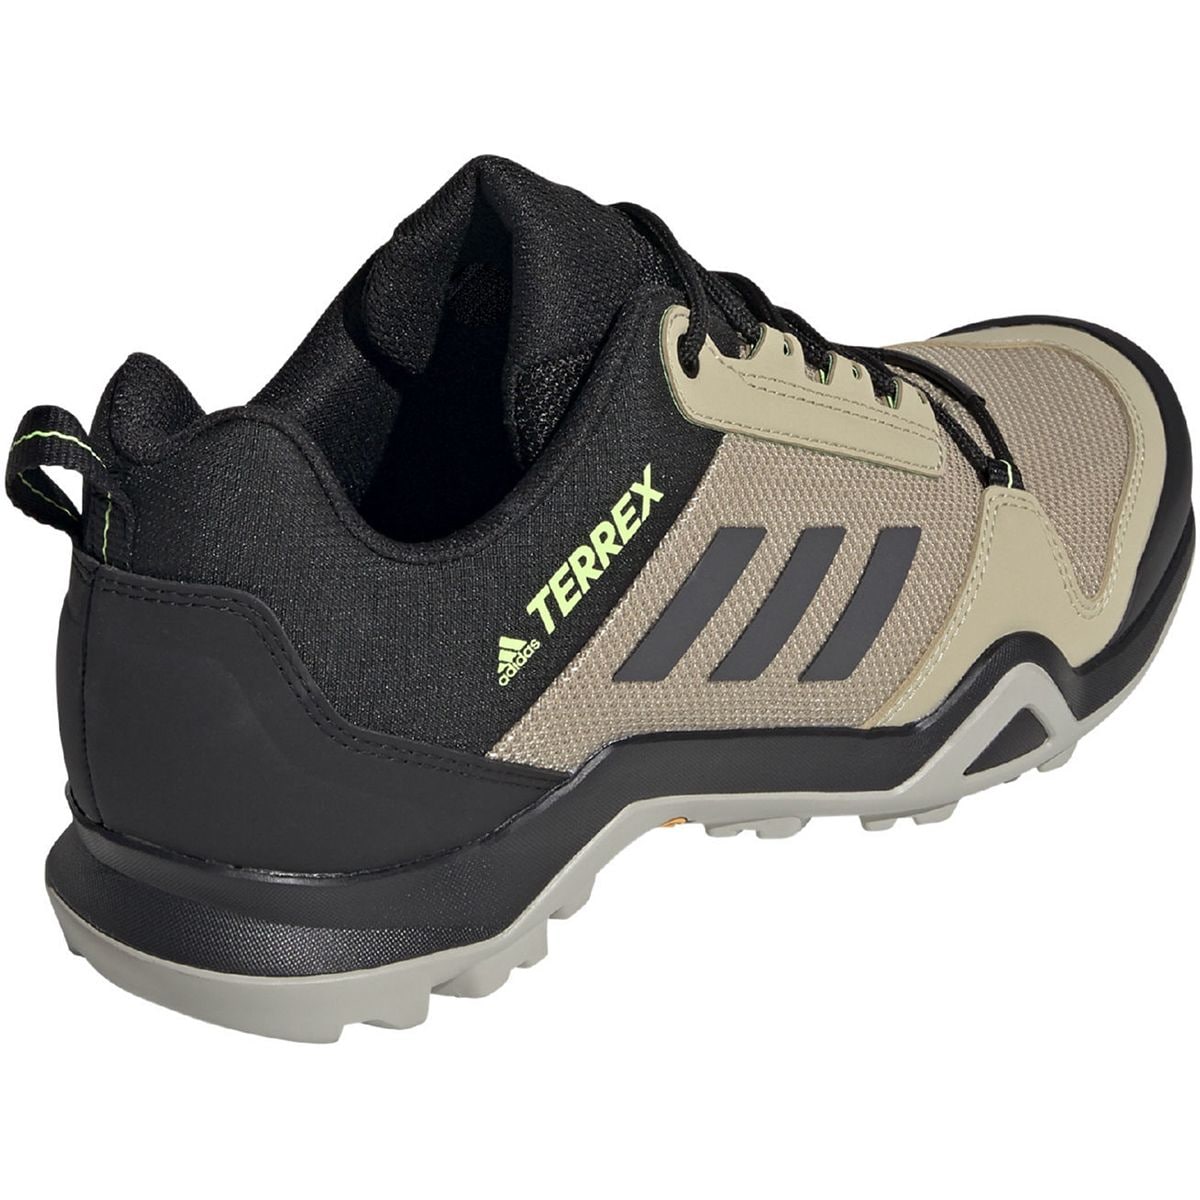 adidas outdoor men's ax3 hiking shoes